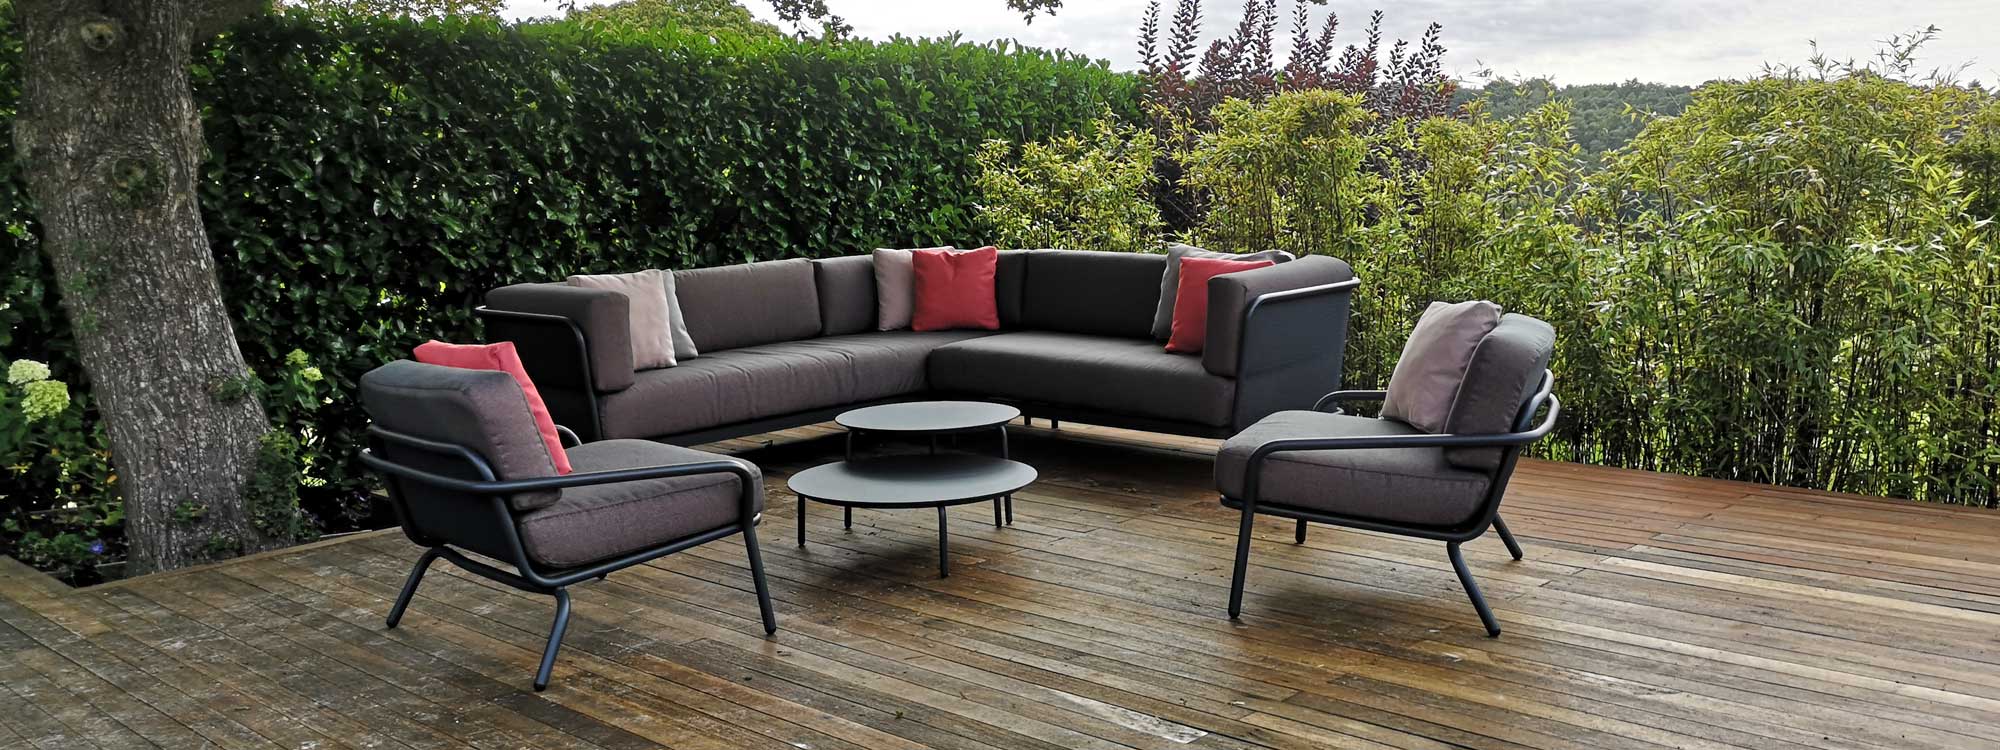 A photo of an L shaped garden sofa with luxury cushions and coffee tables